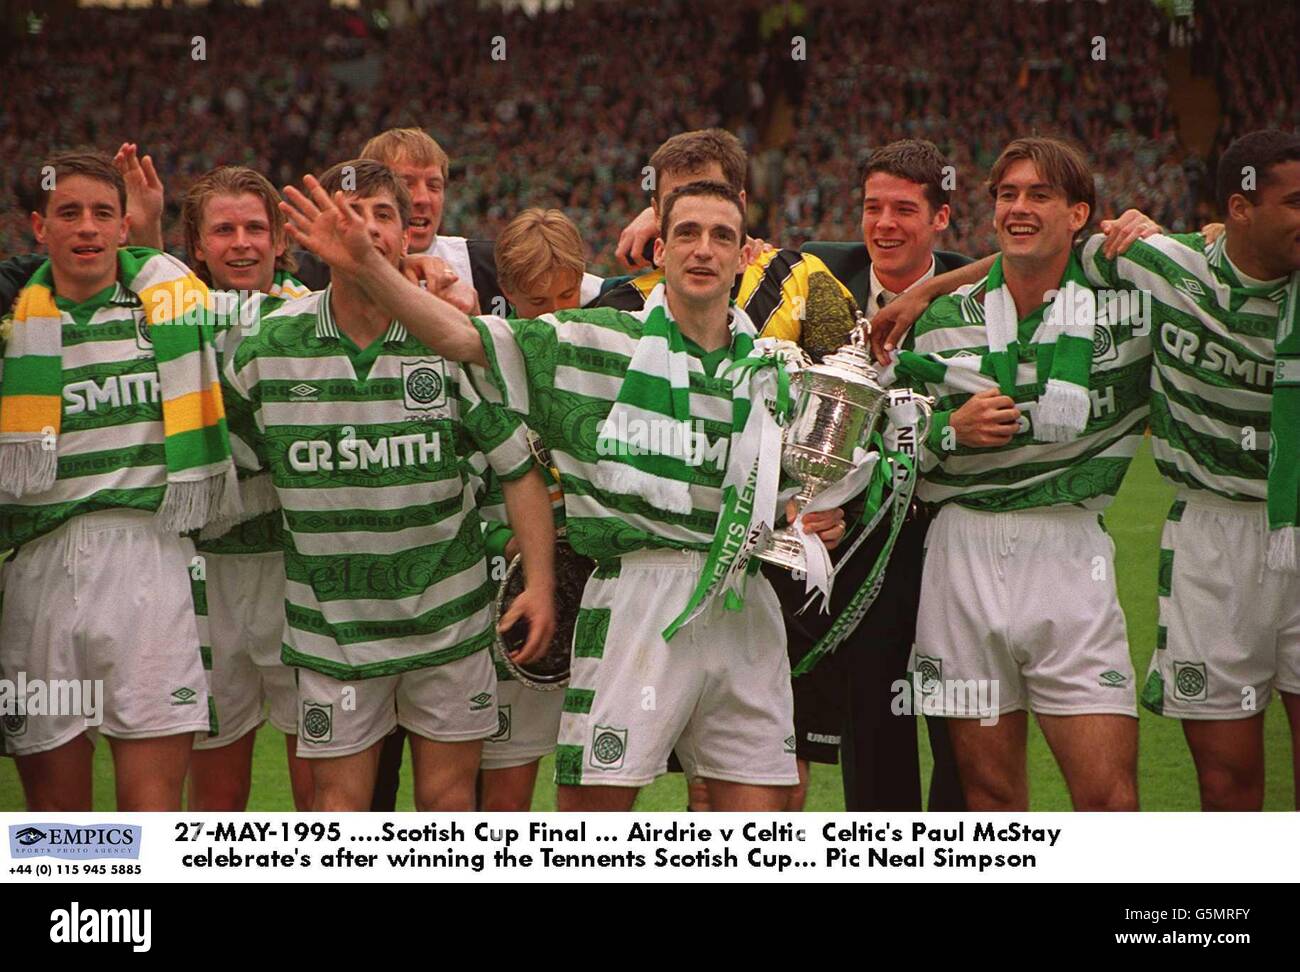 27-MAY-1995 ....Scotish Cup Final ... Airdrie v Celtic Celtic's Paul McStay celebrate's after winning the Tennants Scotish Cup Stock Photo